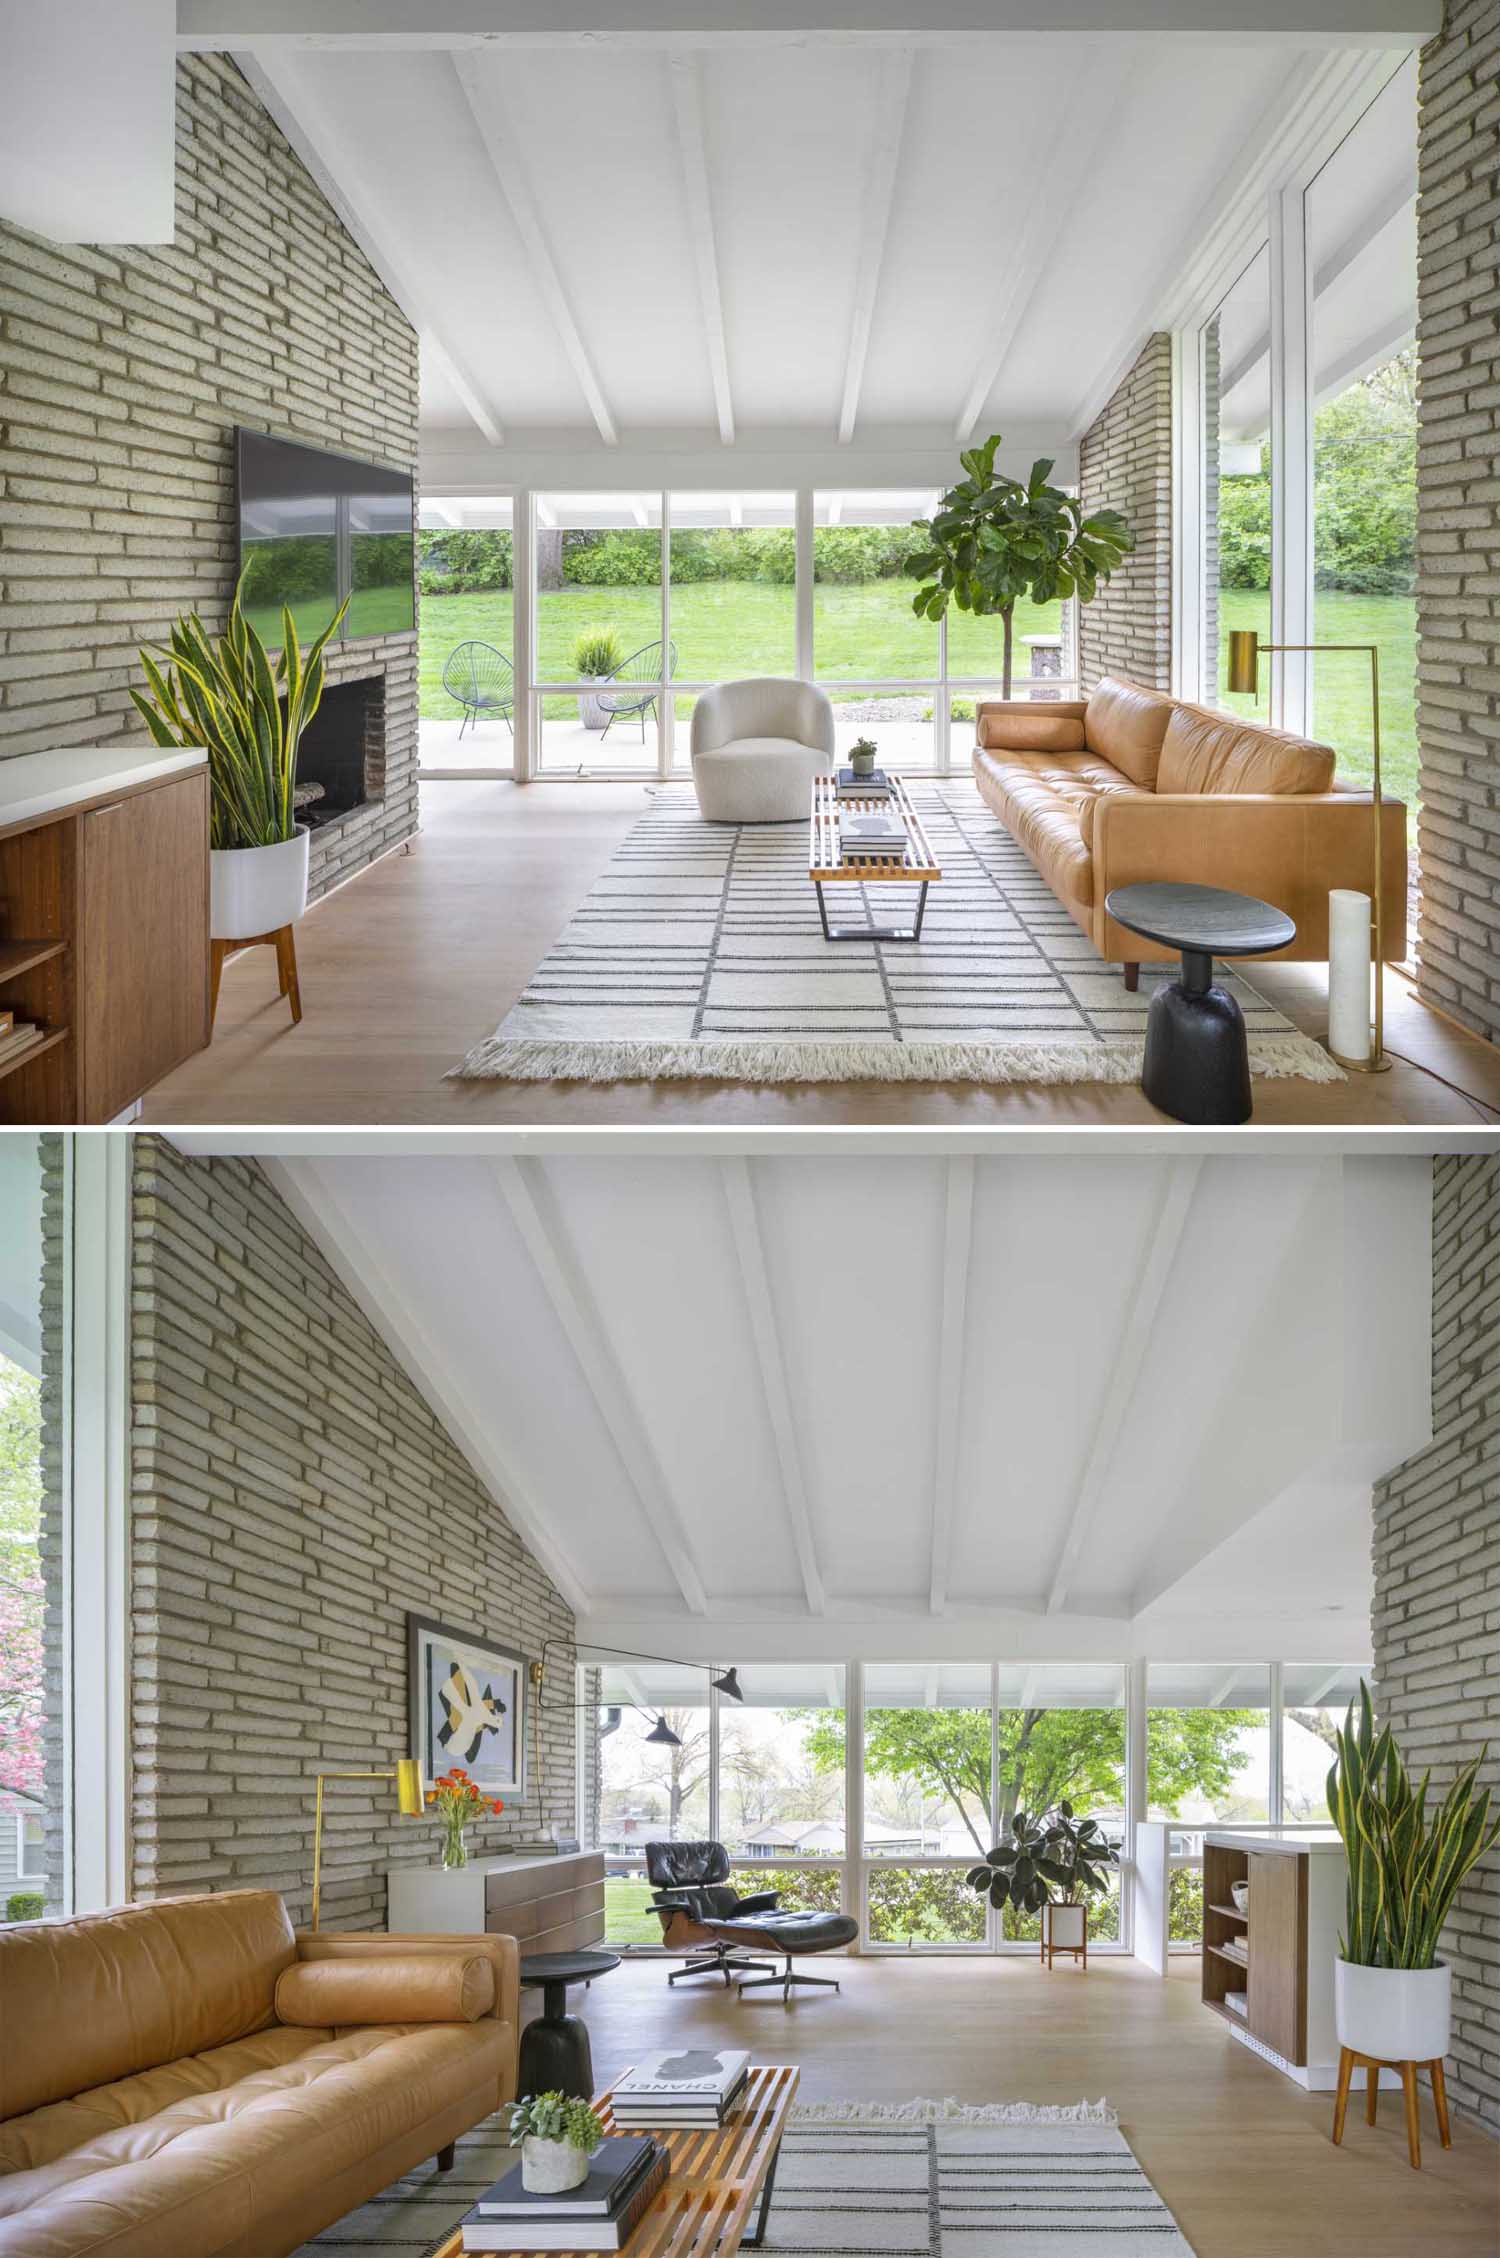 The minimally furnished living room of a renovated mid-century modern house, looks out towards the rear patio, while the other side of the living room opens up into a sitting area that overlooks the street.